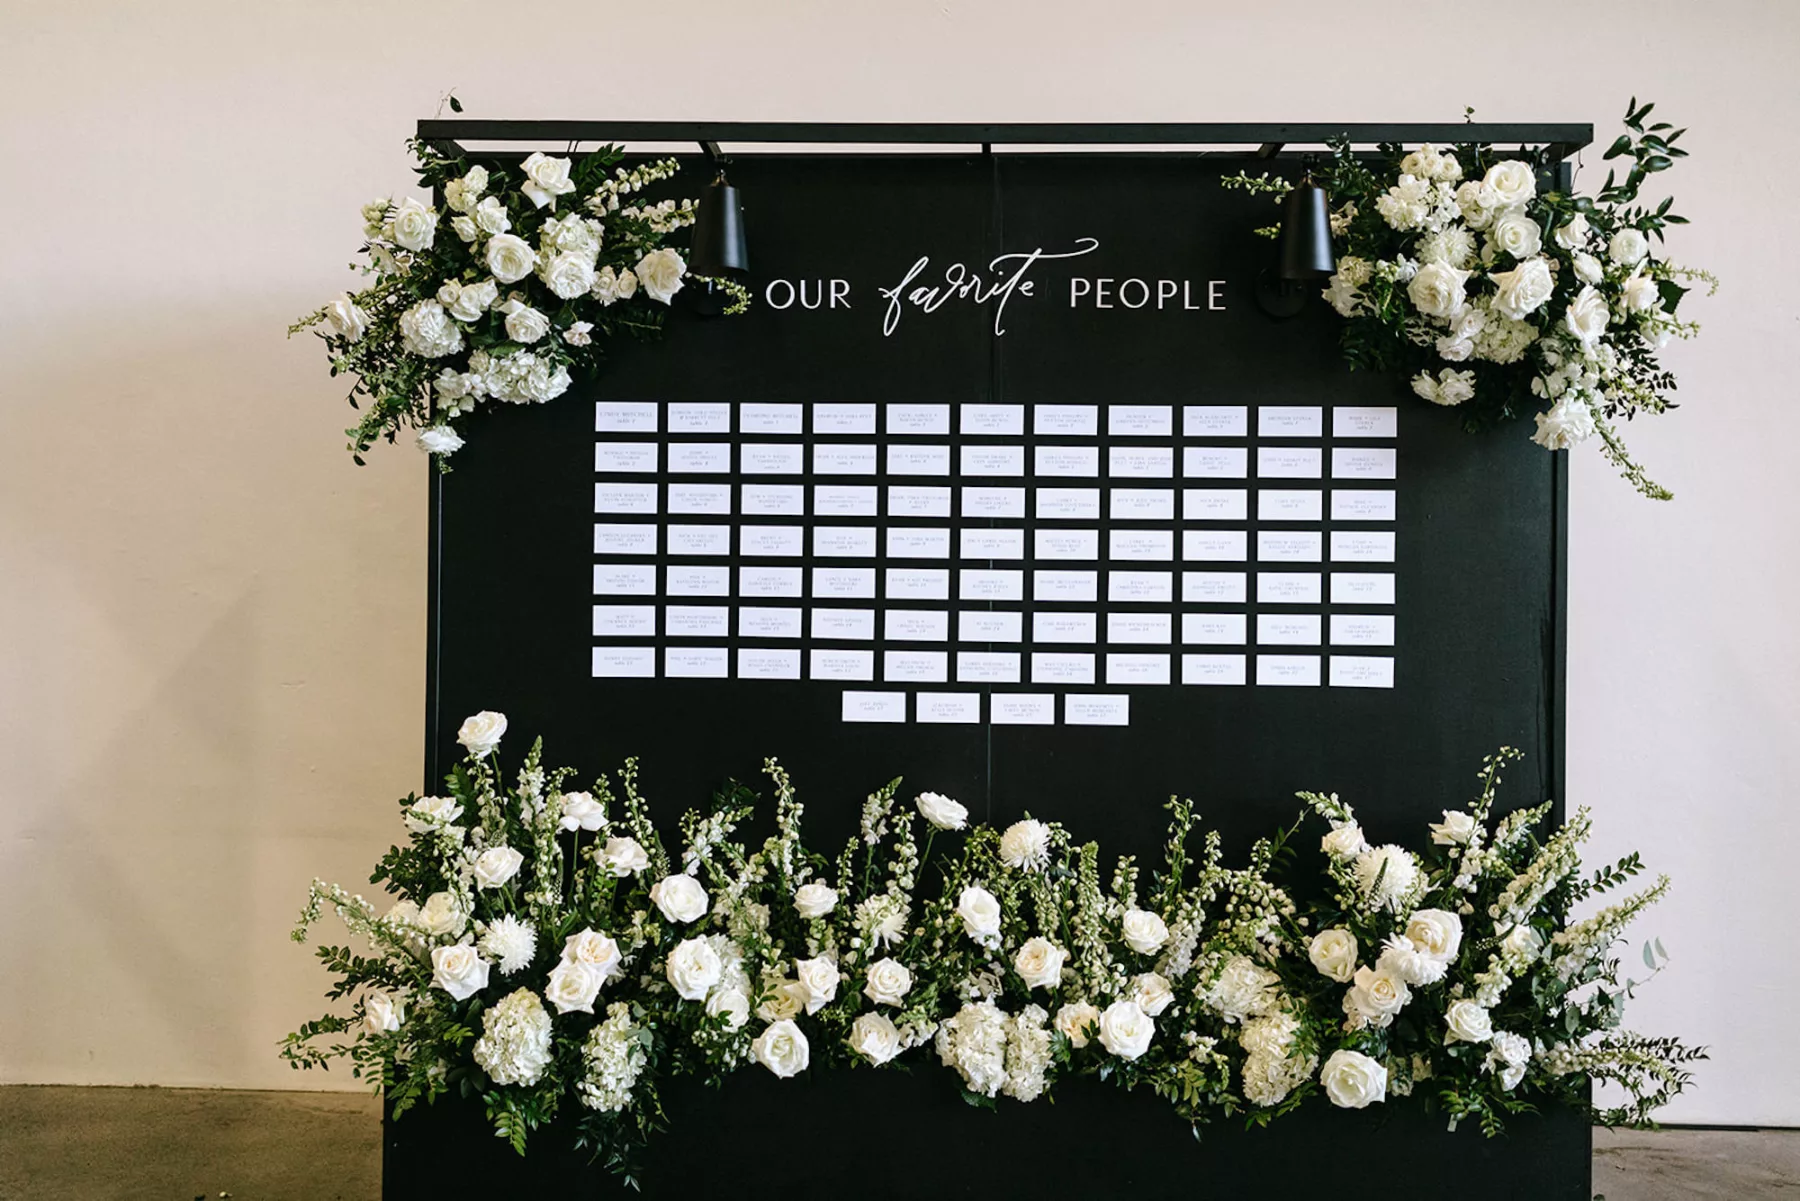 Modern Black and White Our Favorite People Wedding Reception Seating Chart Inspiration | White Roses, Hydrangeas, Chrysanthemums, Snapdragons and Greenery Floral Arrangement | Tampa Bay Florist Bloom Shakalaka